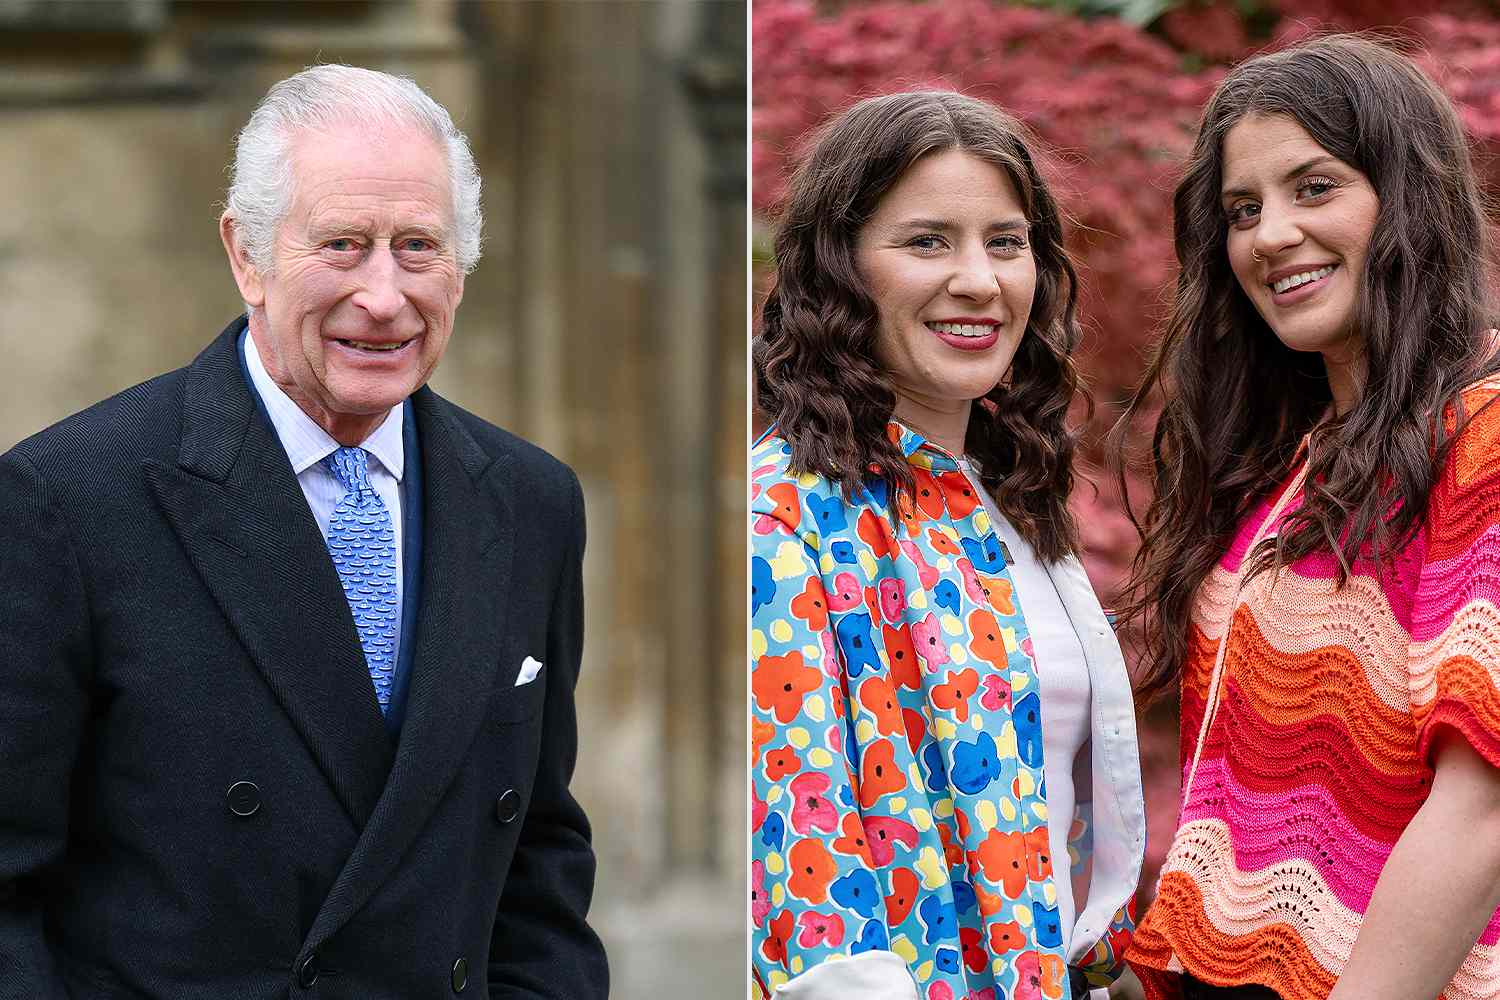 King Charles Honors Twin Who Fought Crocodile Off Sister by Punching Its Snout During Attack